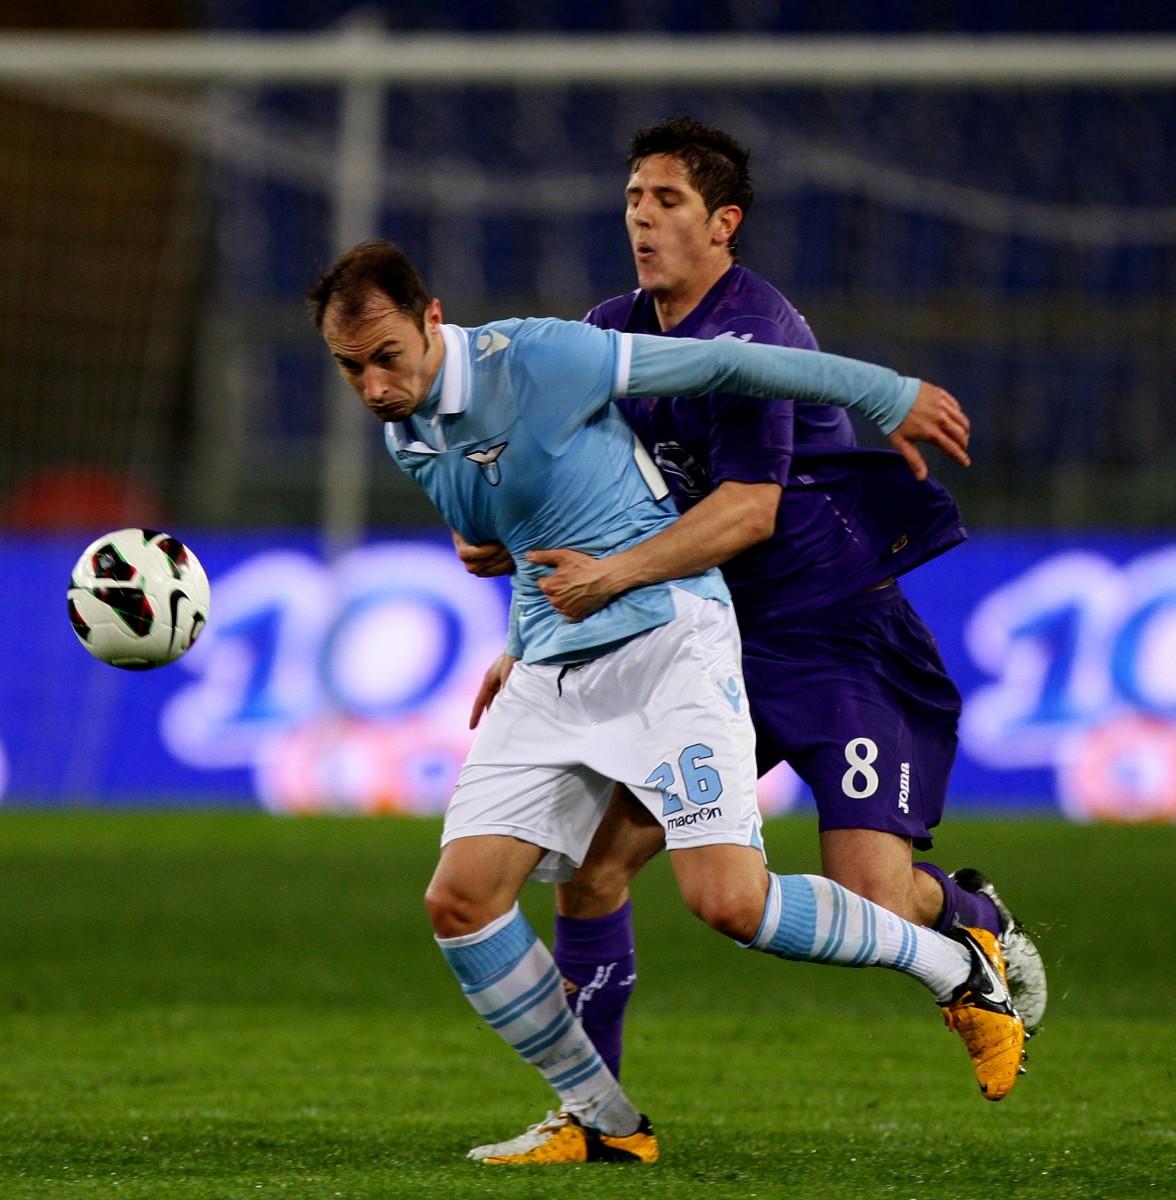 <a><img class="size-full wp-image-1769211" title="S.S. Lazio v ACF Fiorentina - Serie A" src="https://www.theepochtimes.com/assets/uploads/2015/09/LazioFiorentina163464484.jpg" alt="Fiorentina goal scorer Stevan Jovetic holds back Lazio's Stefan Radu in Serie A action at Stadio Olimpico in Rome on Mar. 10. (Paolo Bruno/Getty Images) " width="1176" height="1200"/></a>